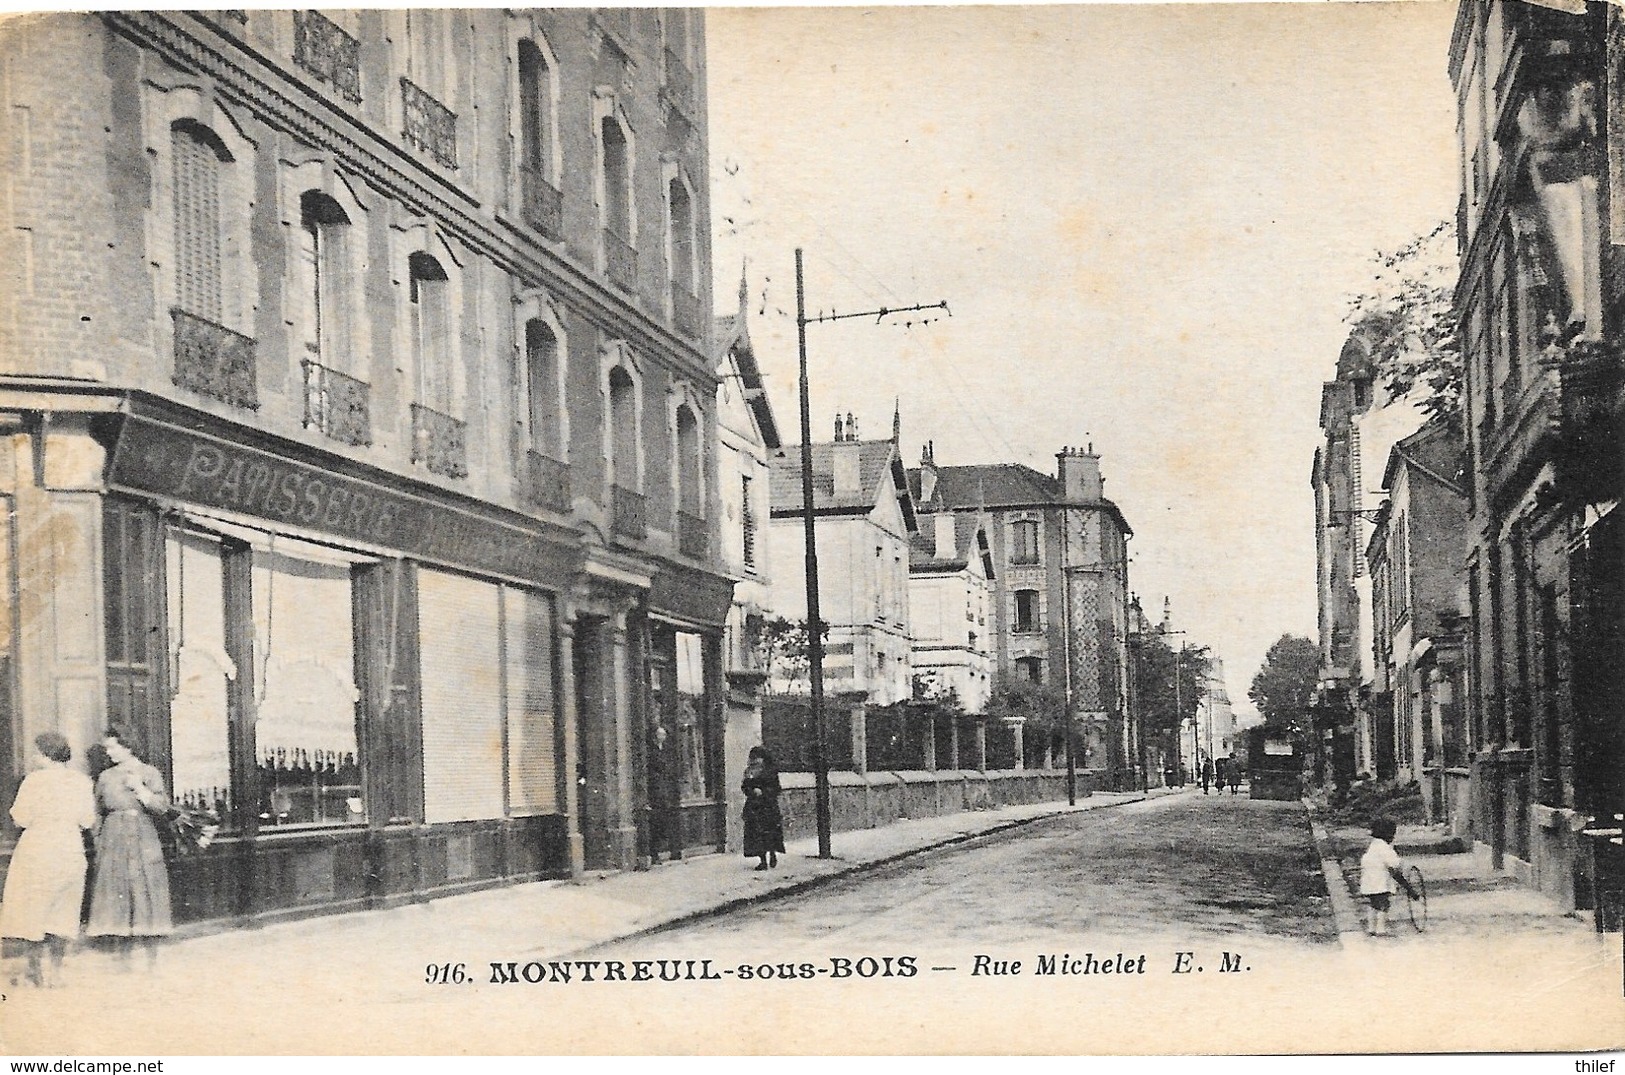 Montreuil-sous-Bois NA2: Rue Michelet - Montreuil